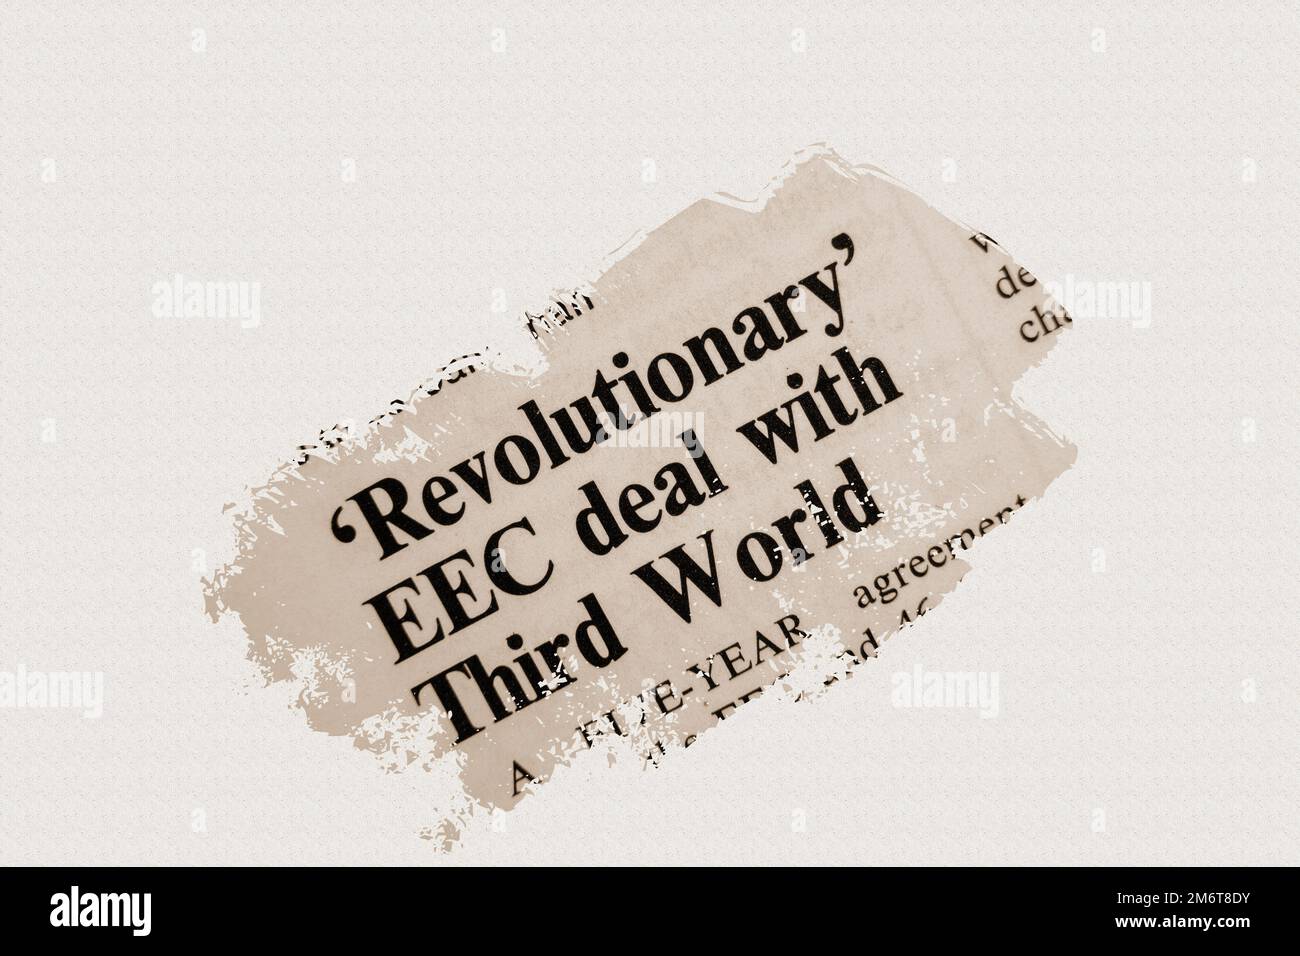 news story from 1975 newspaper headline article title - Revolutionary EEC deal with Third World - sepia Stock Photo